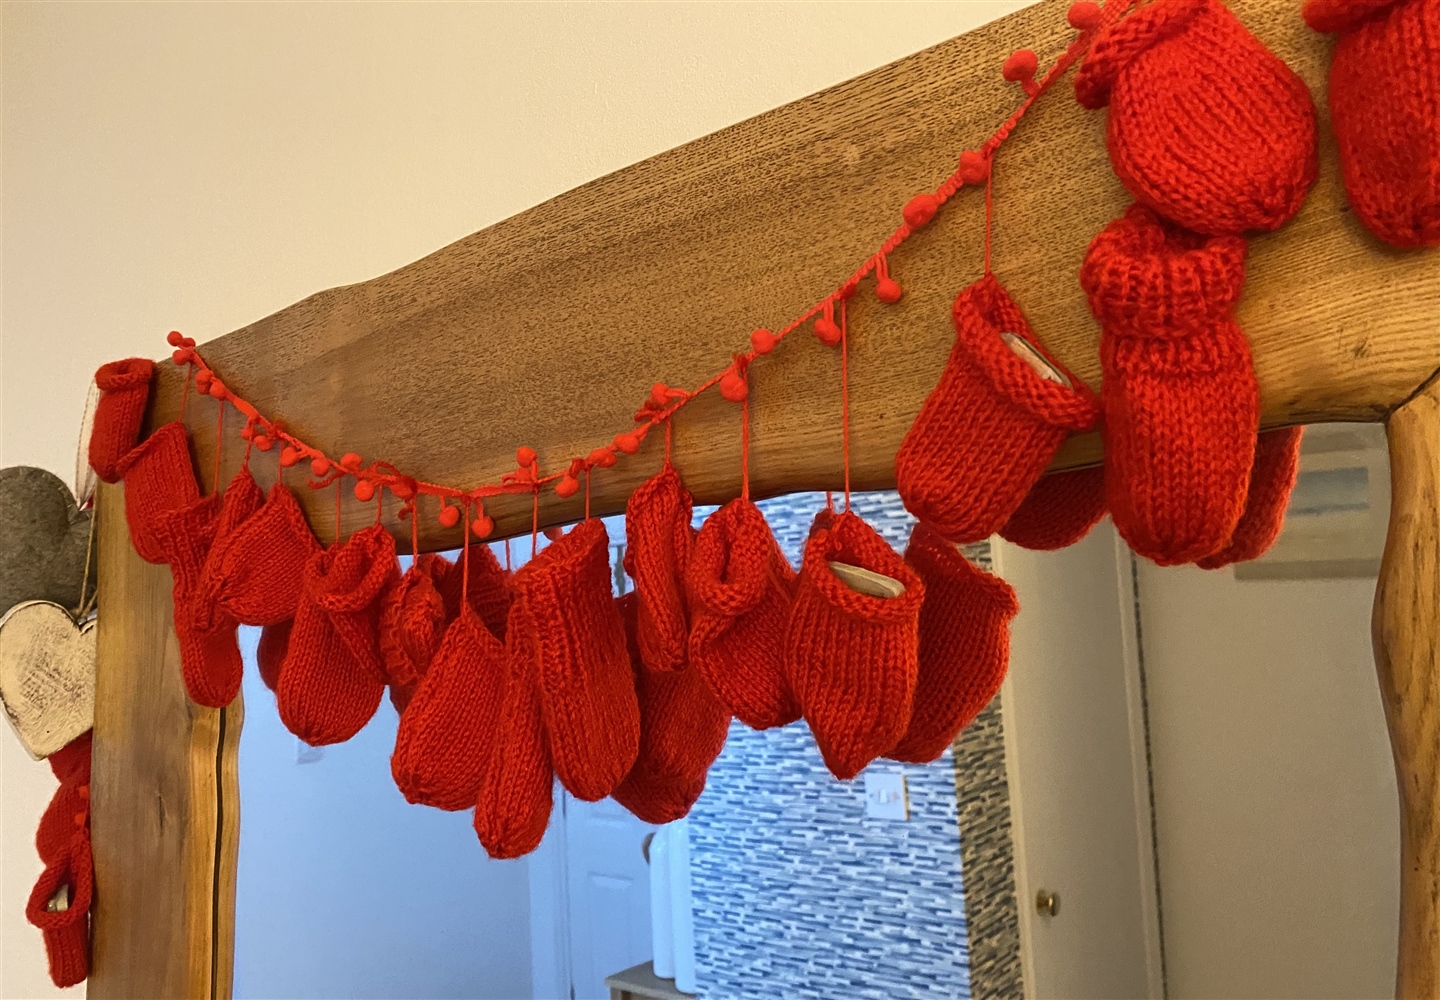 A knitted hanging decoration made of red wool and lots of mittens.